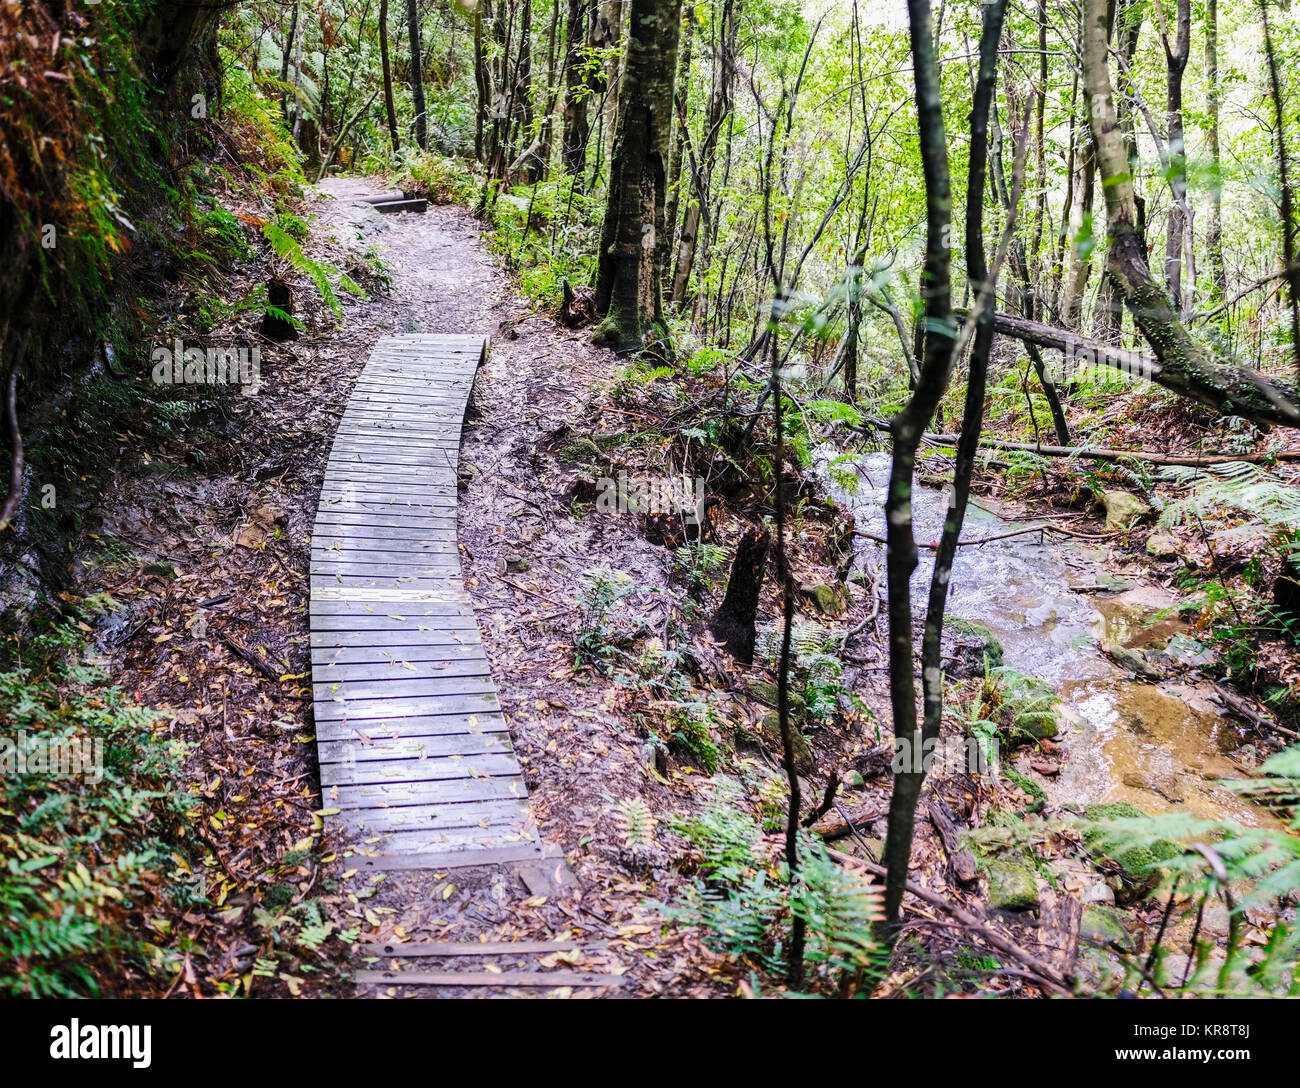 Wooden path across forest Stock Photo